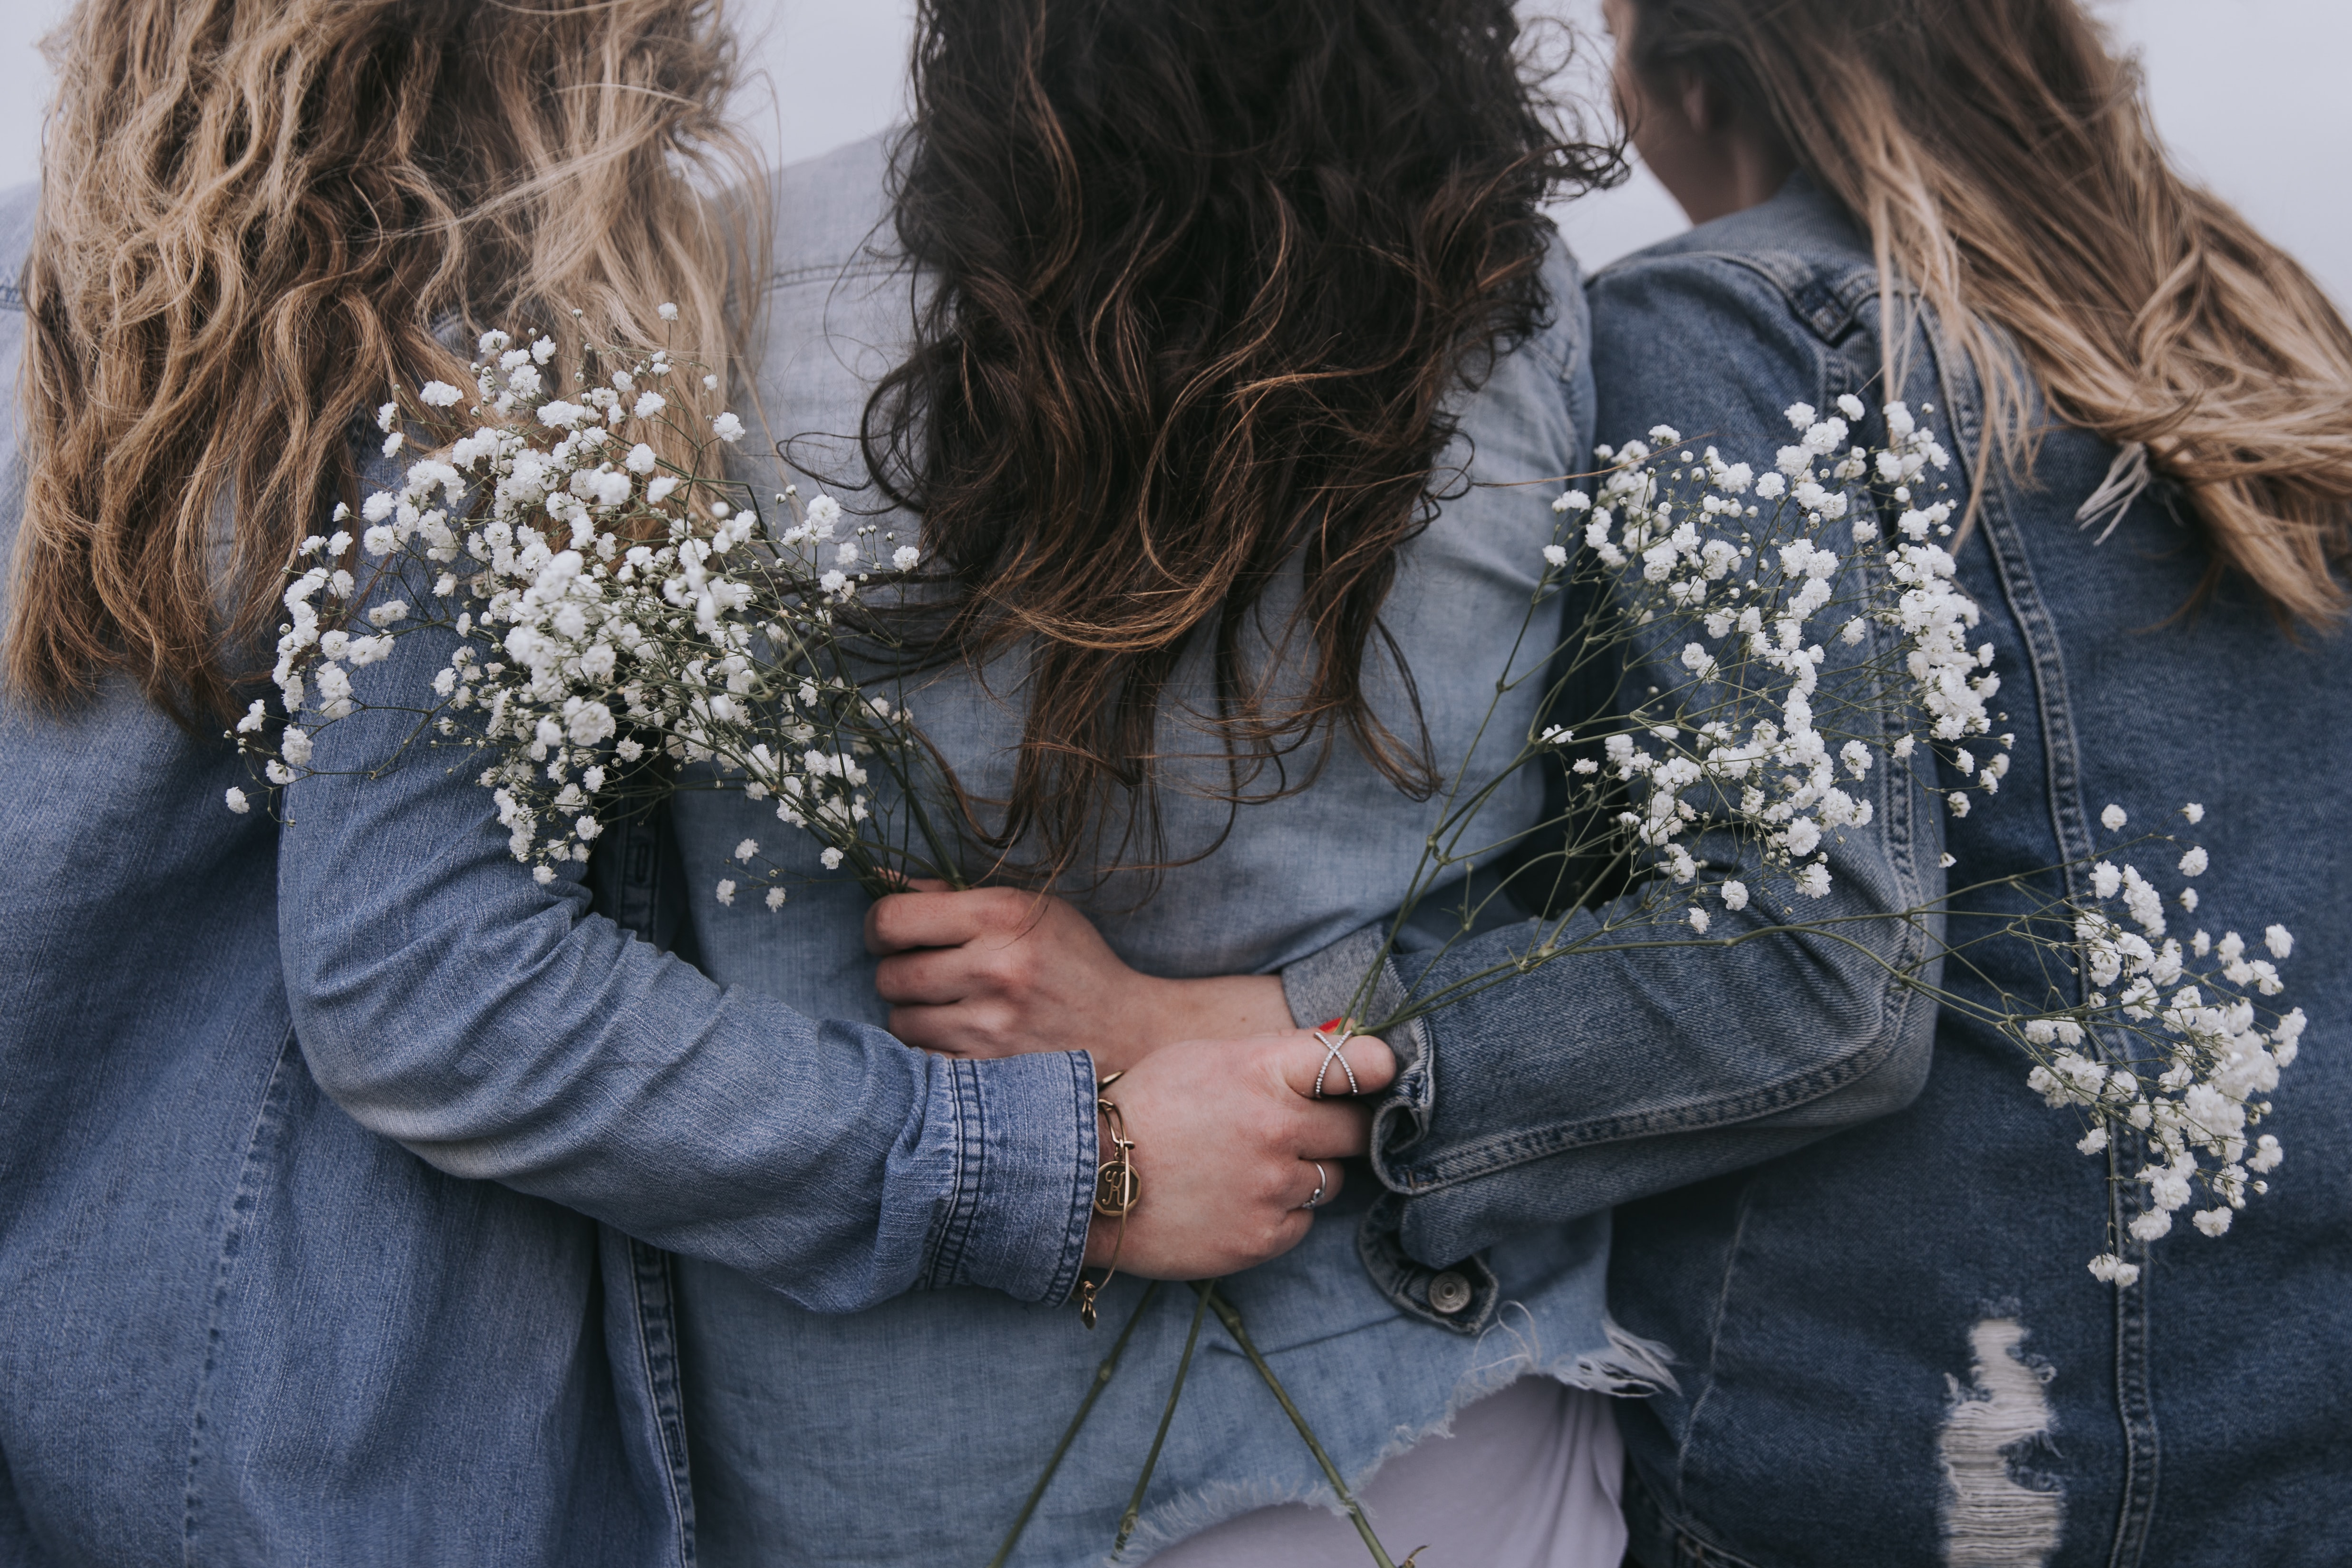 friends holding flowers